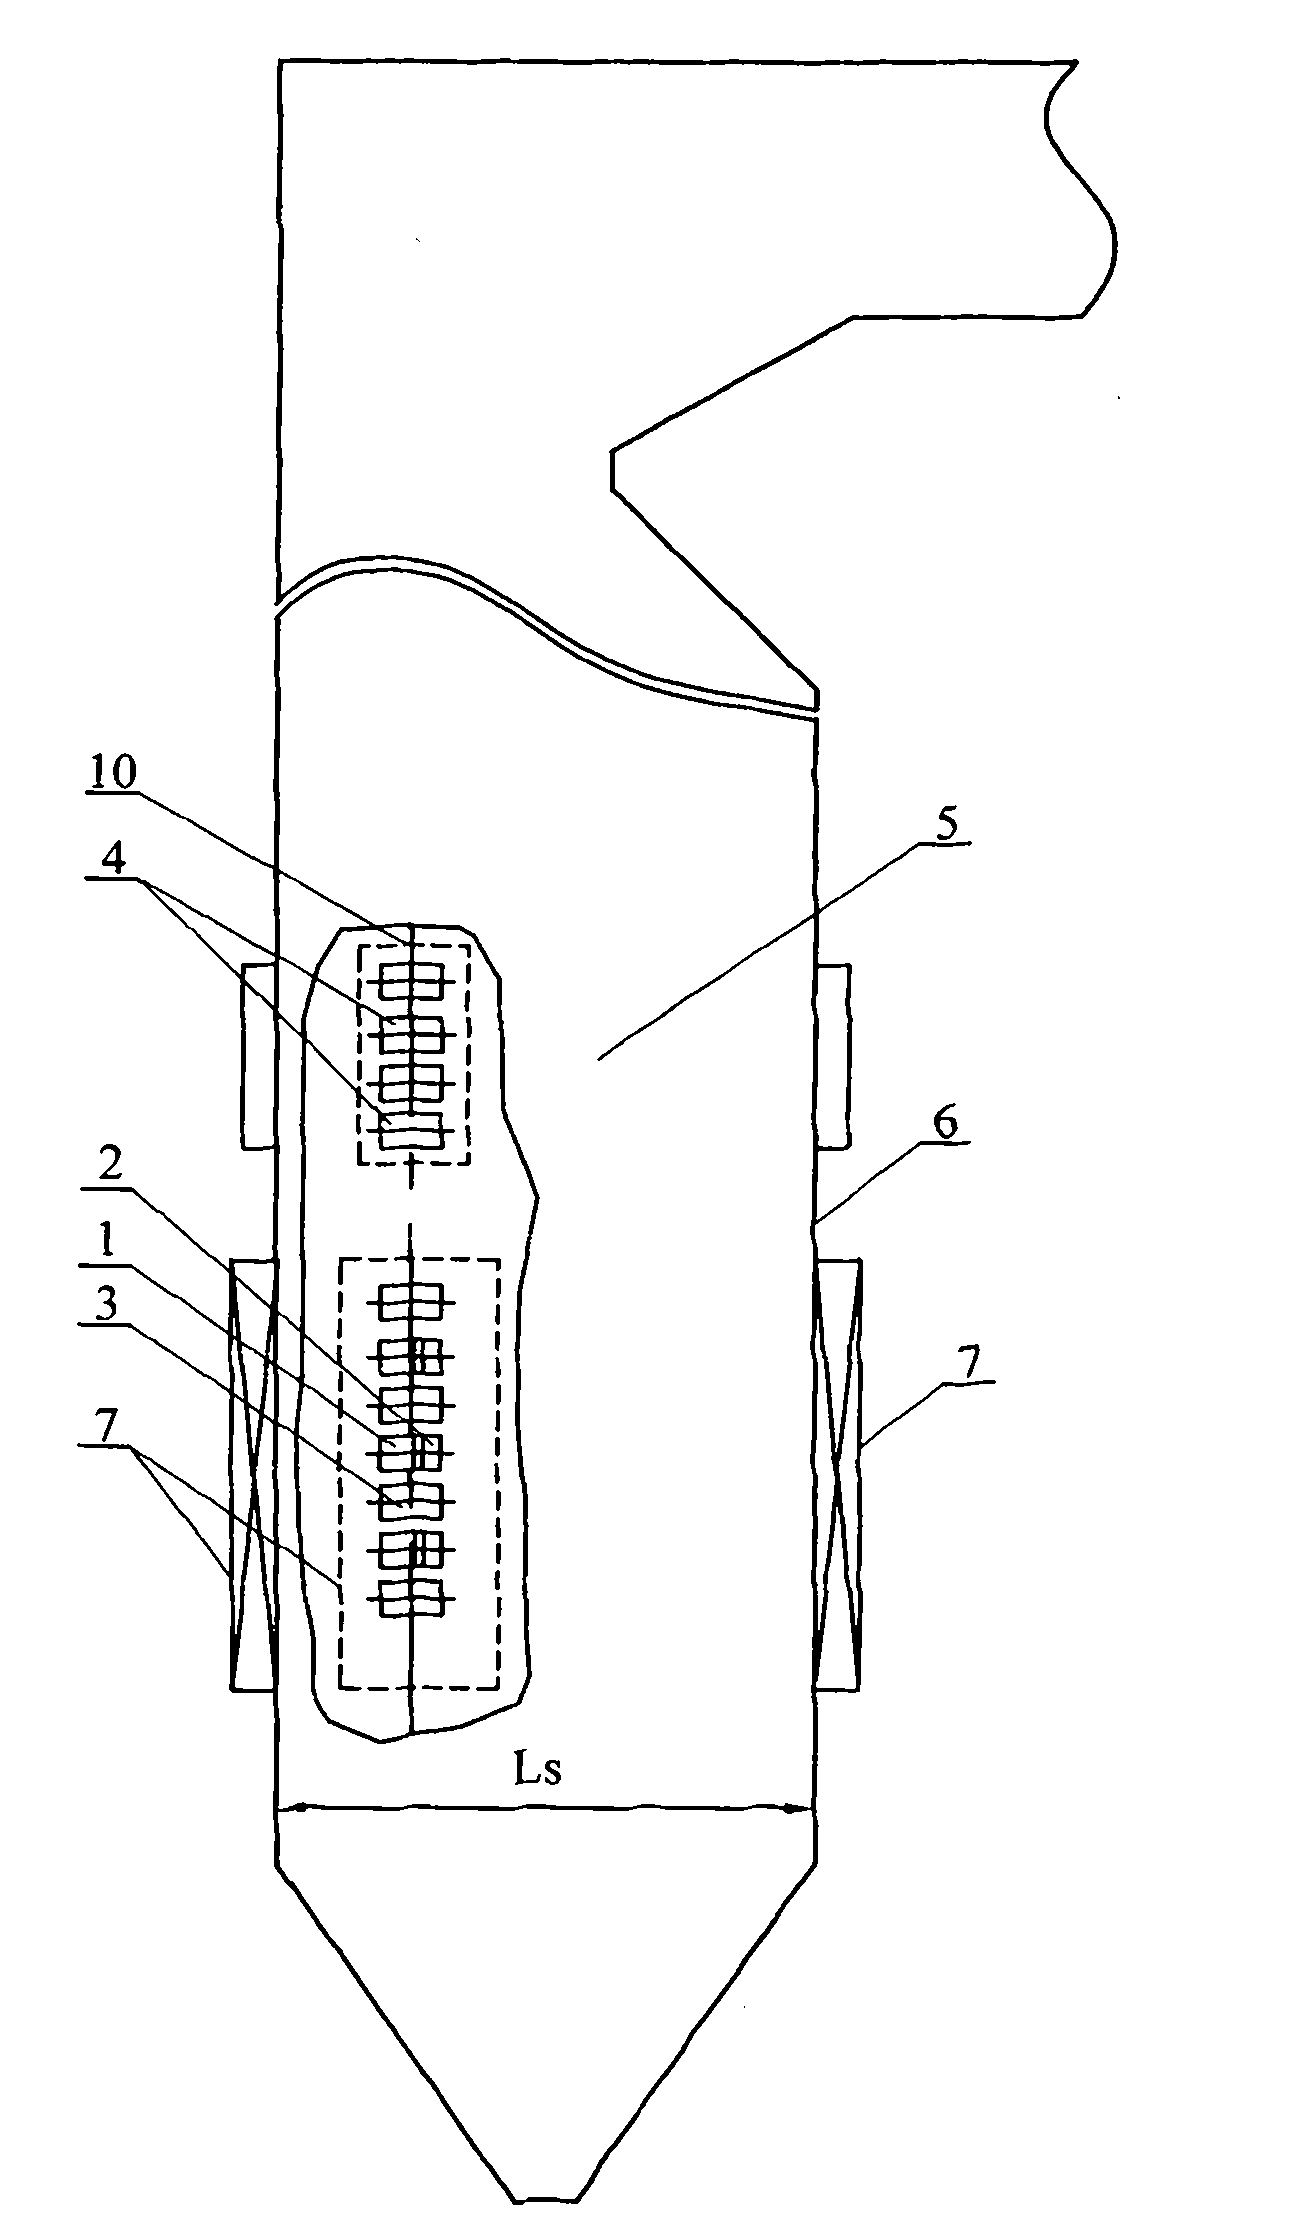 Wall-arranged direct-flow pulverized coal combustion device with side secondary air